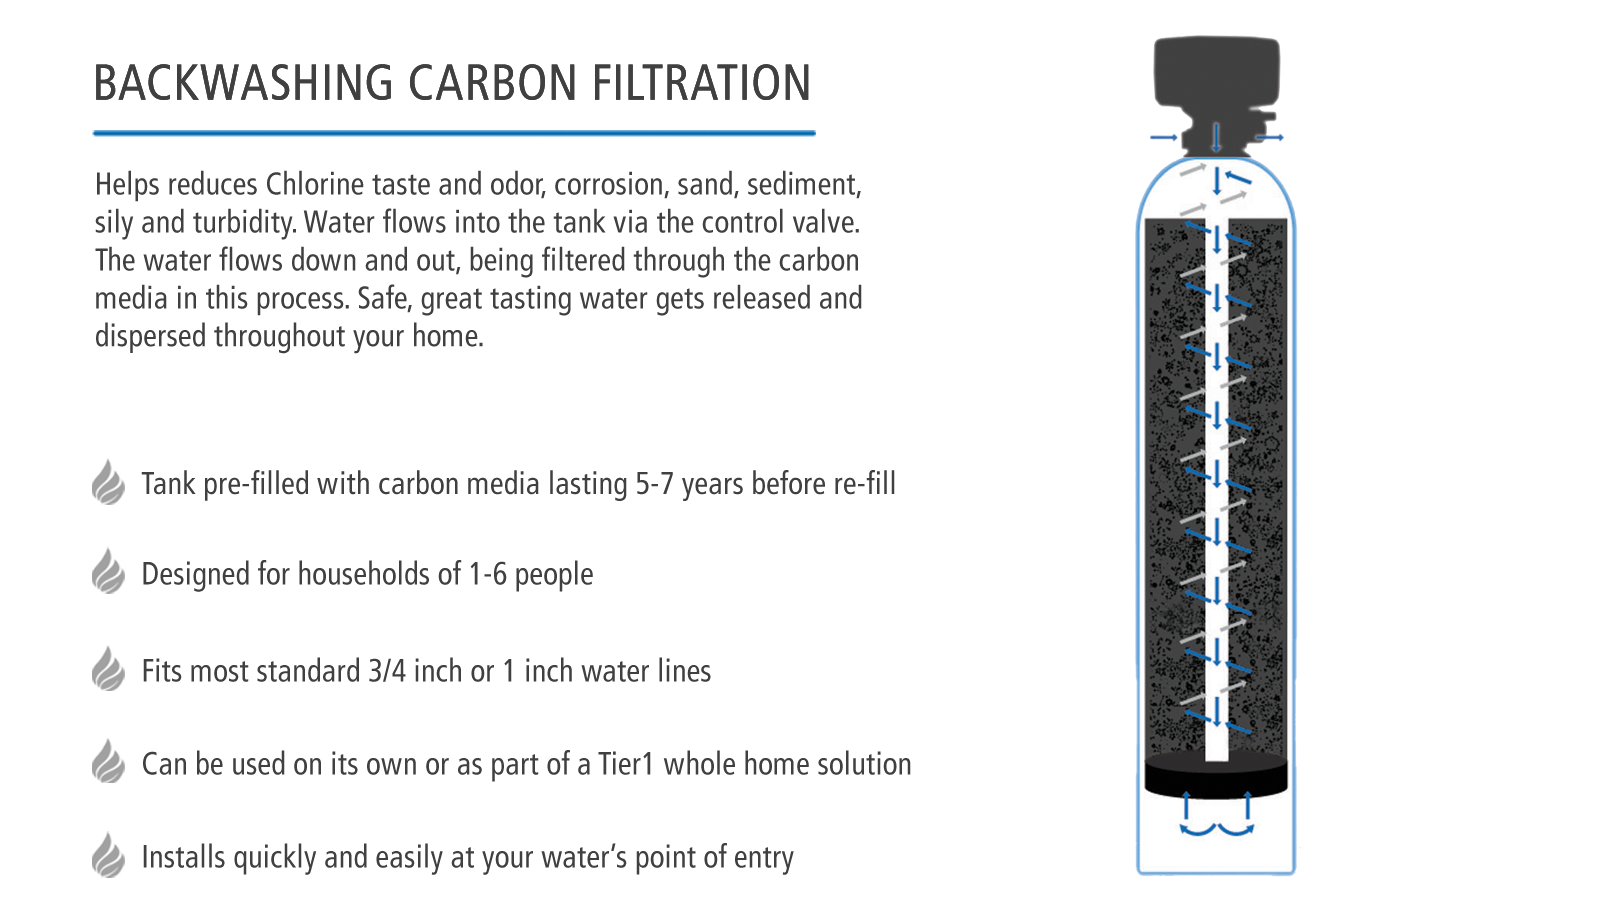 Precision Series Tier1 Whole House Water Filtration System for Chlorine, Taste & Odor Reduction for 4 - 6 Bathrooms